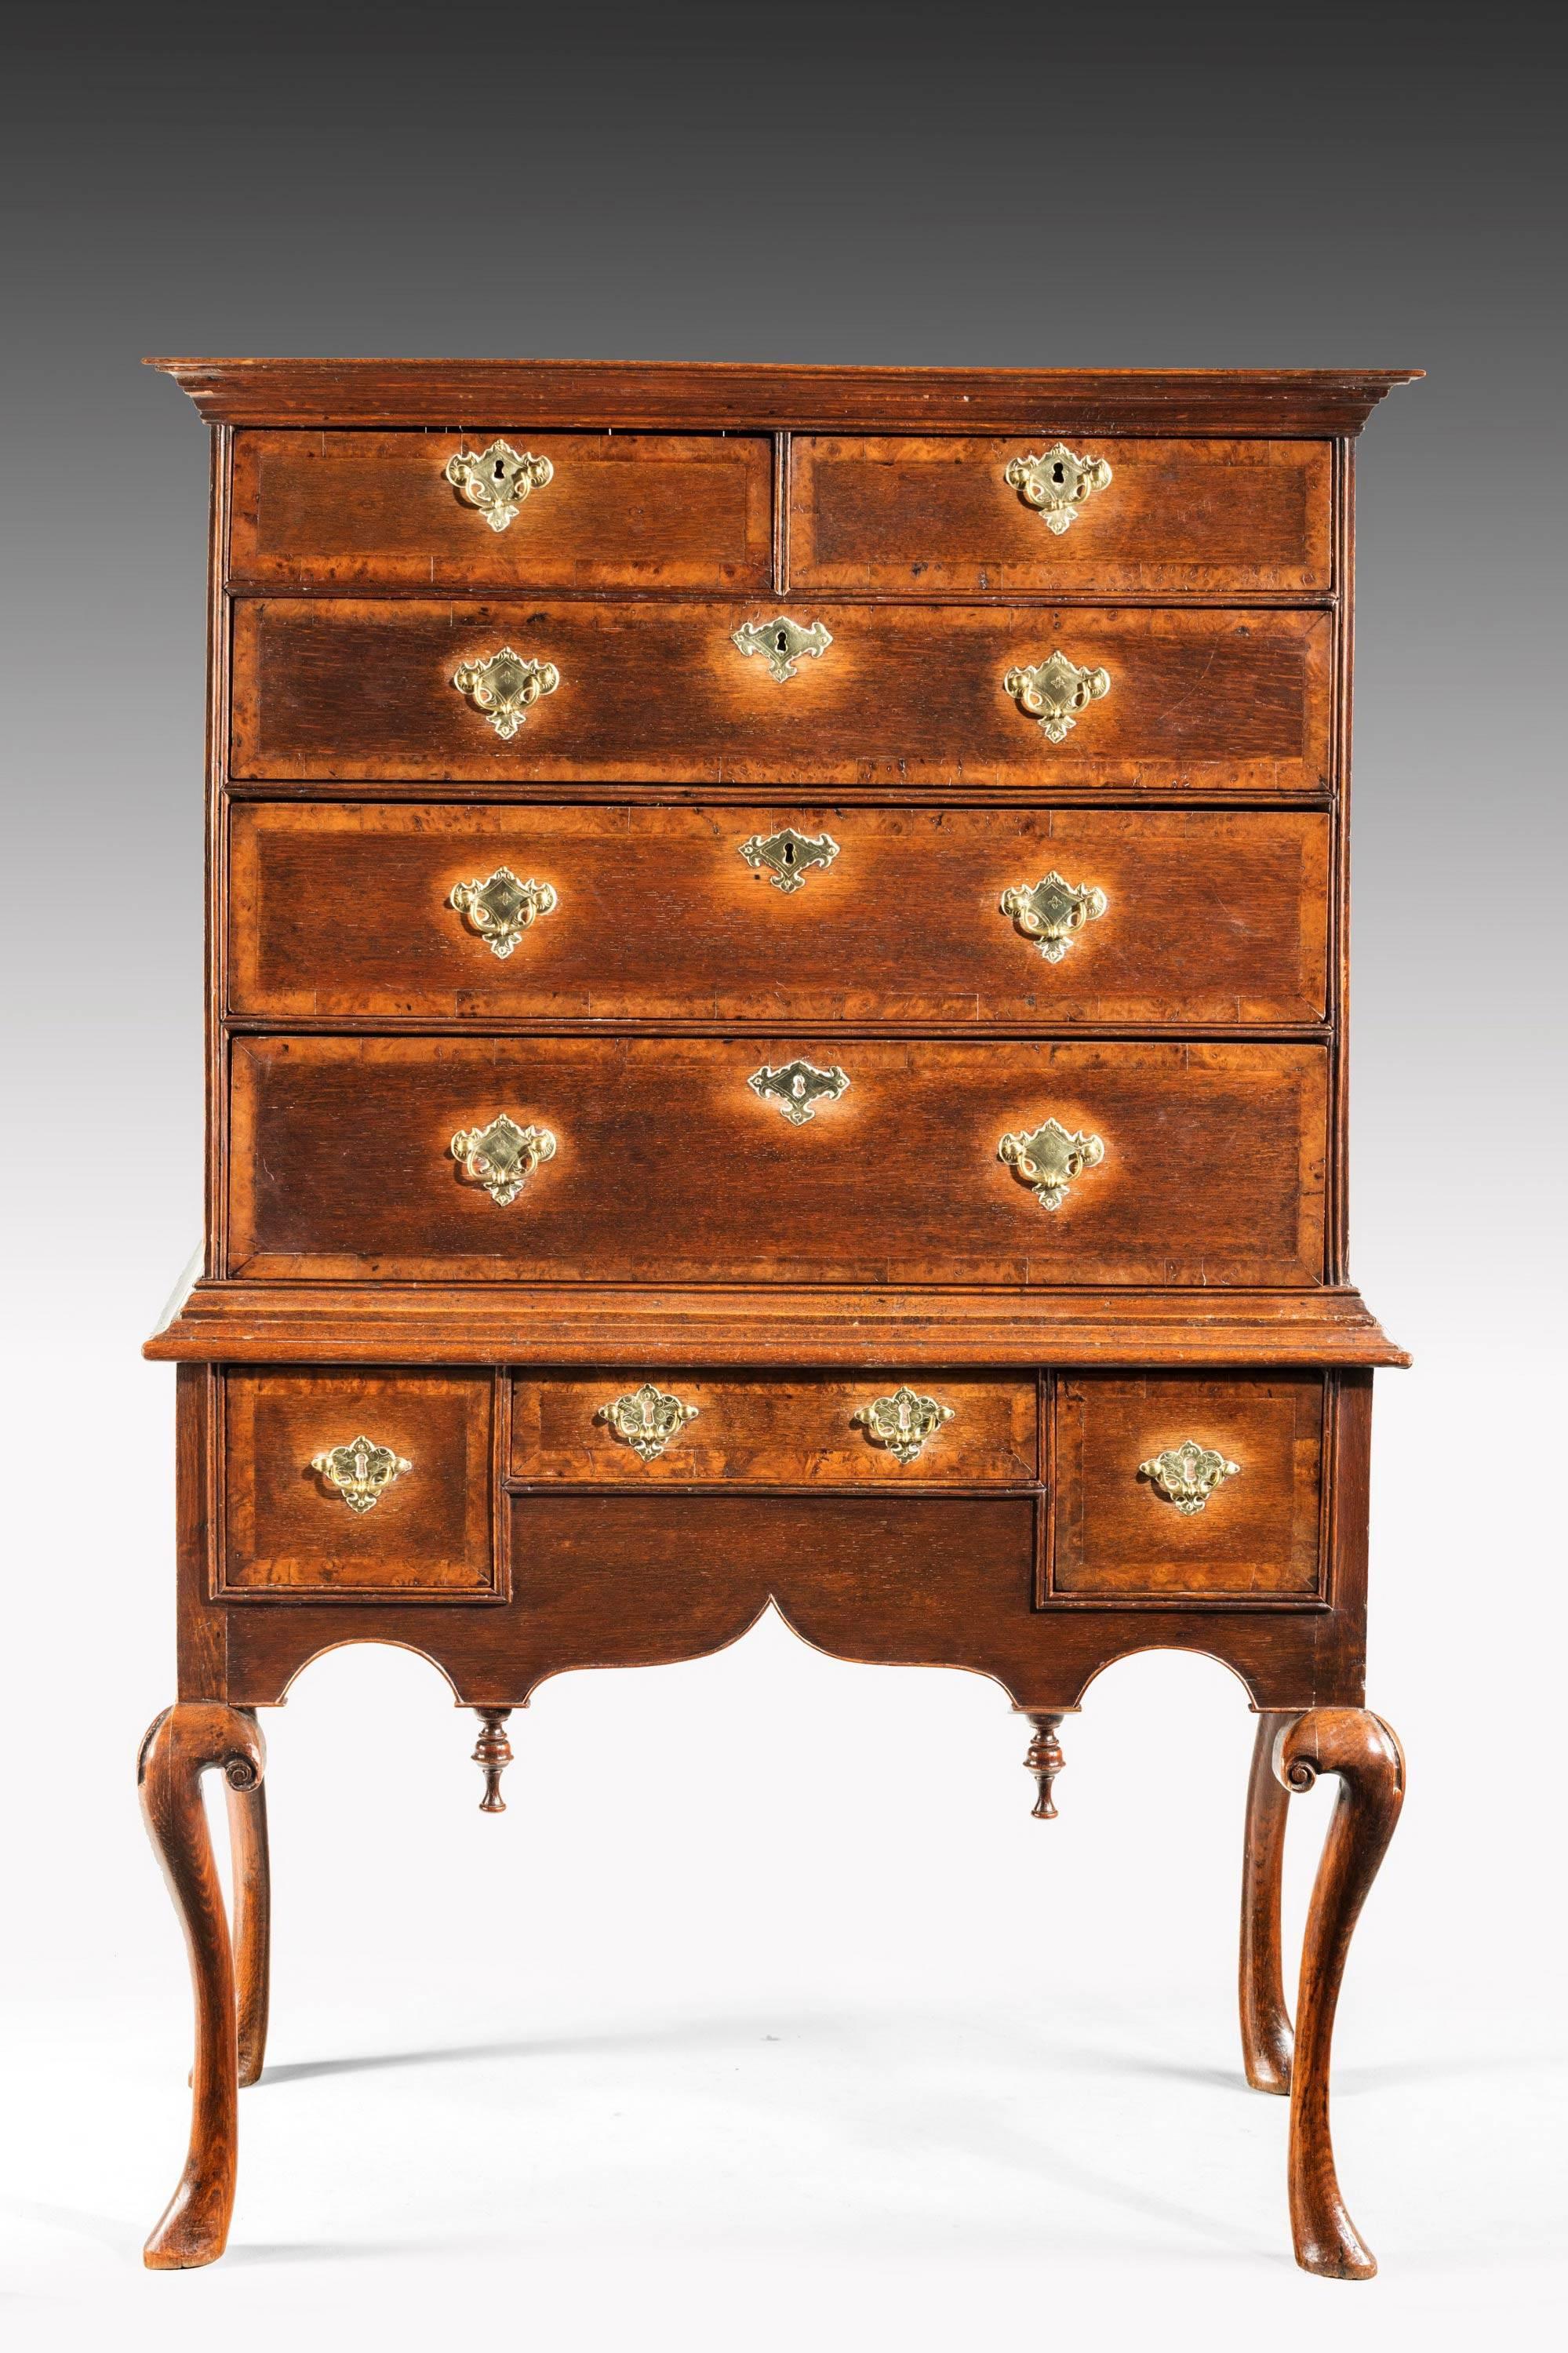 A most unusual and elegant mid-18th century oak tallboy or chest on chest. The drawers broadly banded in a burr timber. On high, finely carved, cabriole supports. Excellent color and patina.

